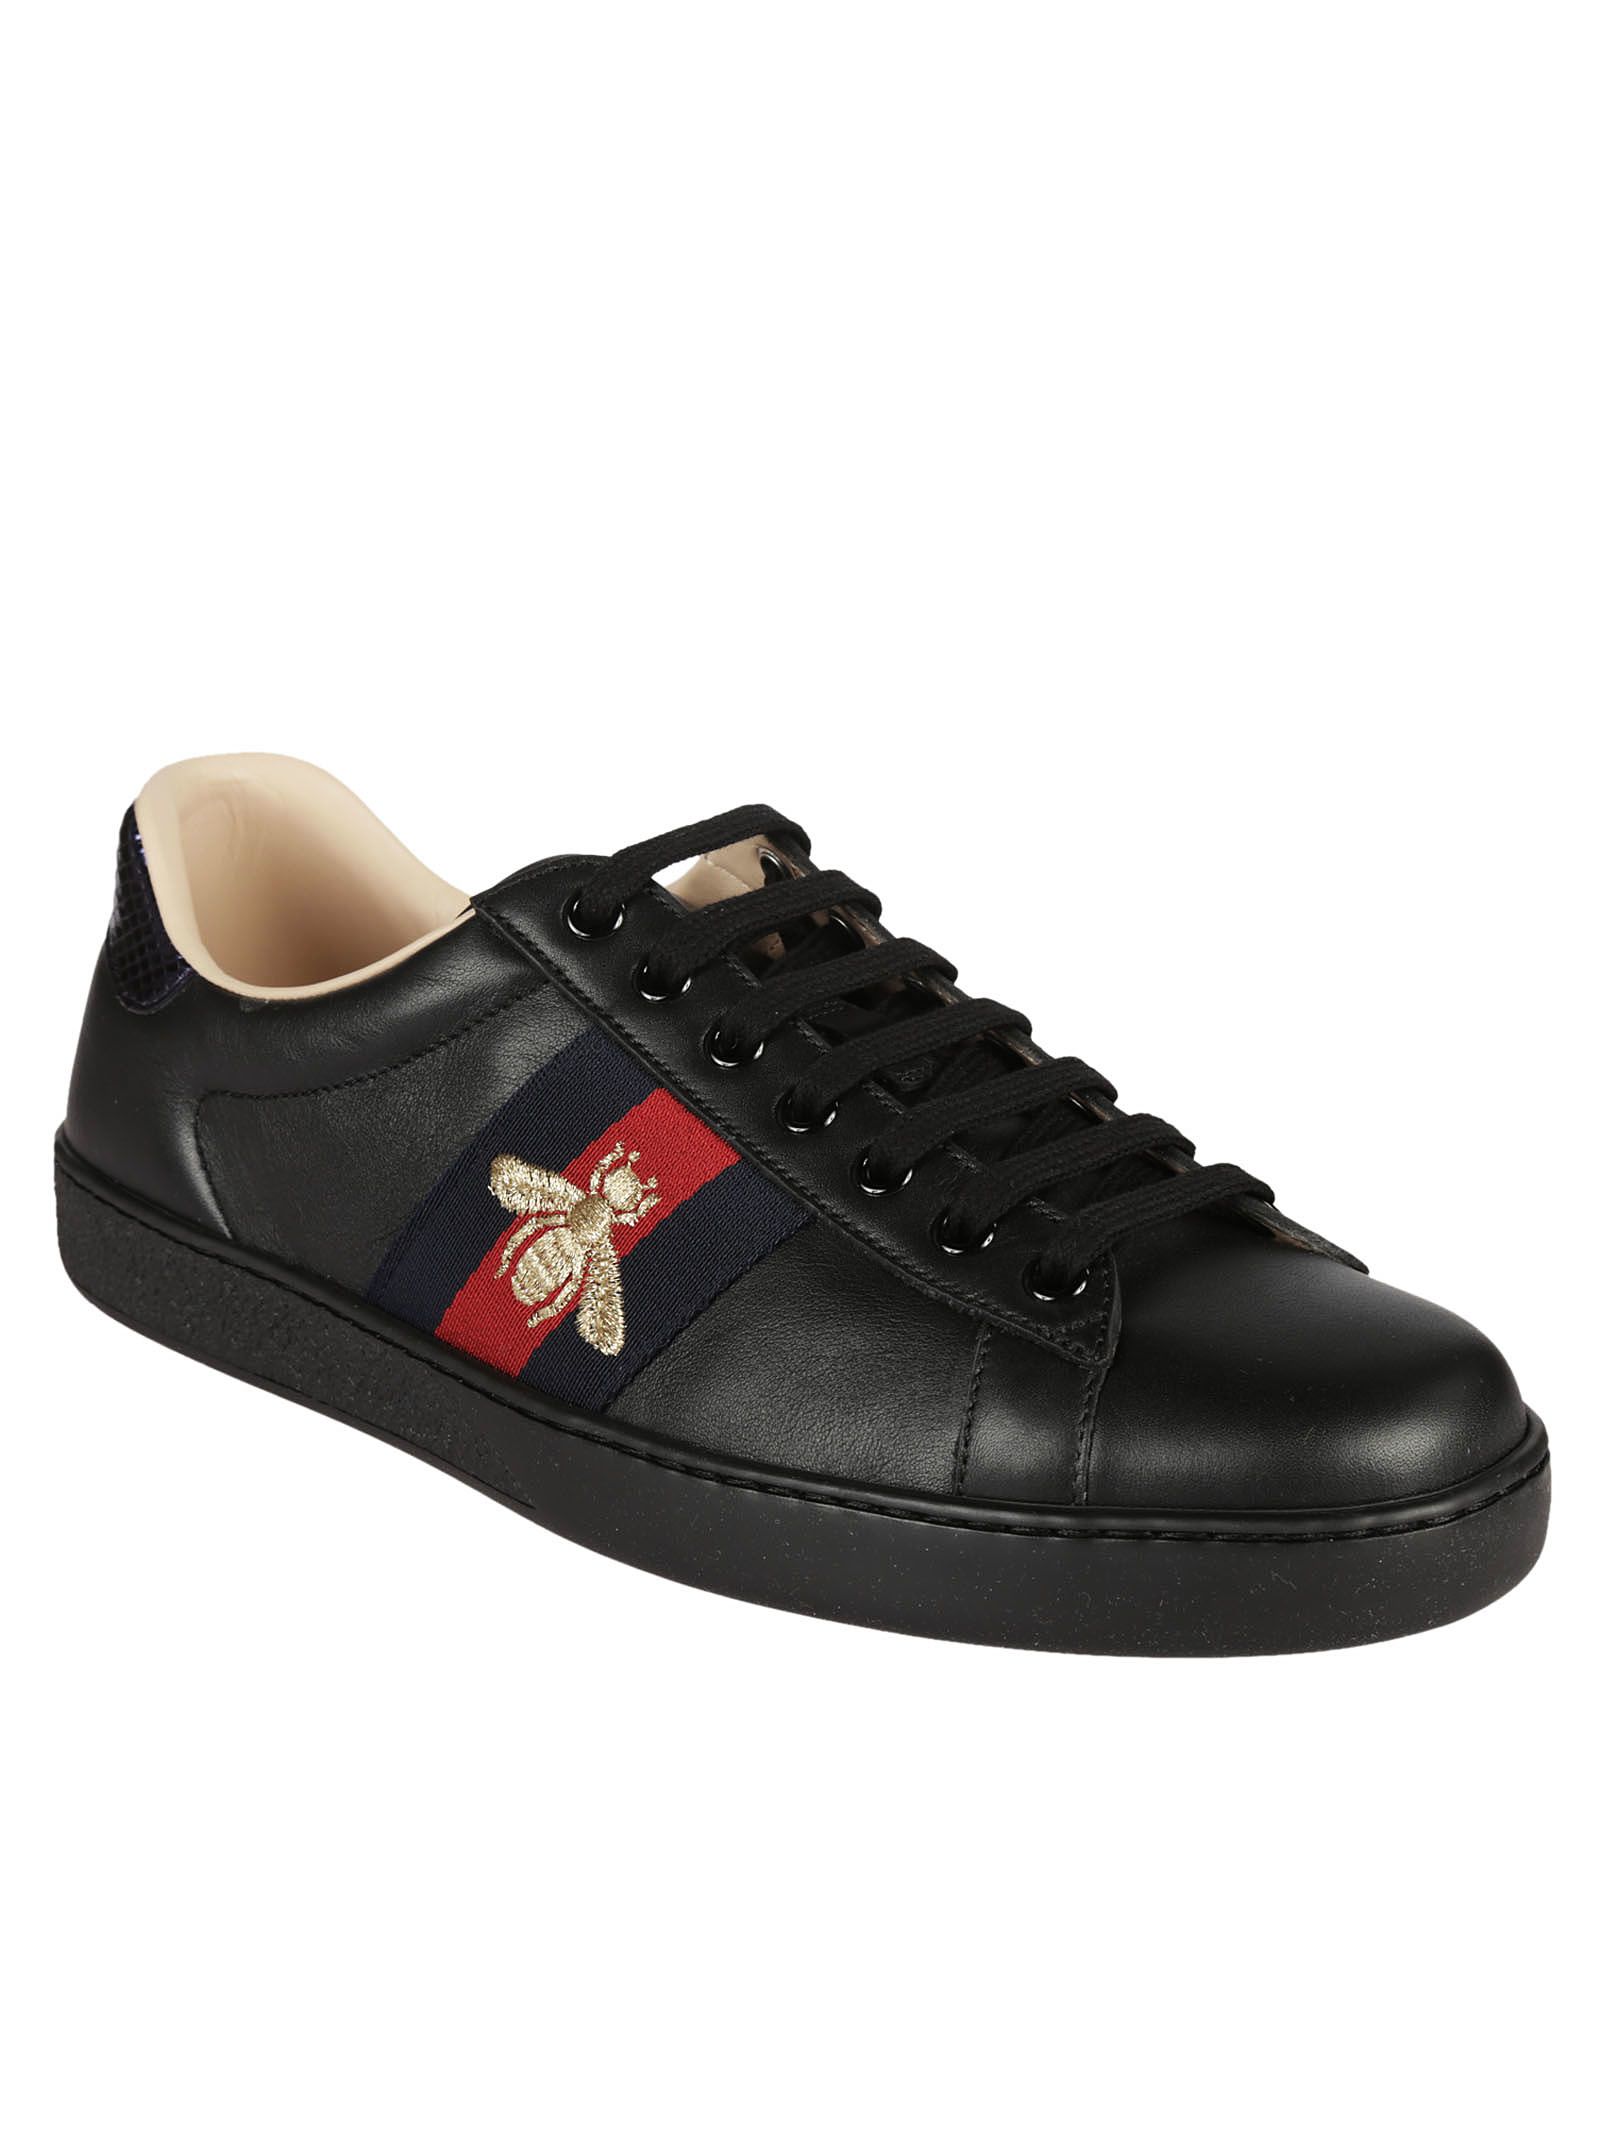 gucci ace sneakers mens black